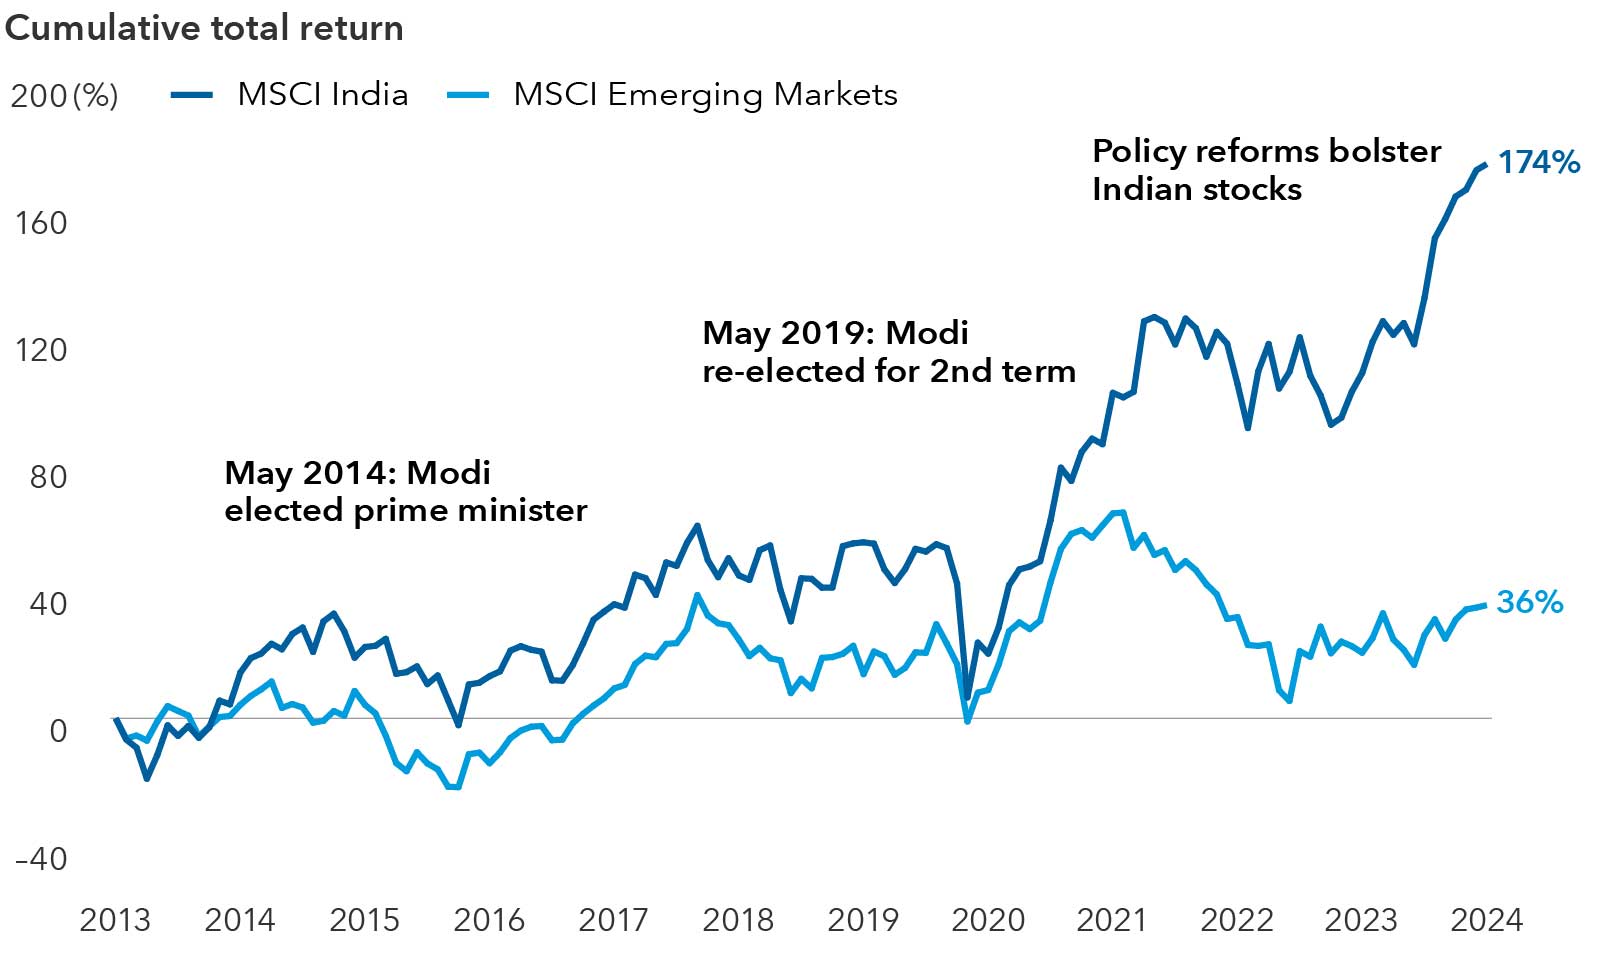 This line graph illustrates the cumulative total return percentage of two stock indices, the MSCI India and the MSCI Emerging Markets, from 2013 to 2024. The line representing the MSCI India index shows a significant upward trend, particularly after two key political events marked on the graph: the election and re-election of Prime Minister Modi in May 2014 and May 2019, respectively. From 2013 to May 2024, MSCI India’s cumulative return percentage rose from zero to 174%, vastly outperforming the MSCI EM index, which also starts near zero in 2013 and finishes at 36% by mid 2024. The vertical axis indicates the return percentage, ranging from negative 40% to 200%.